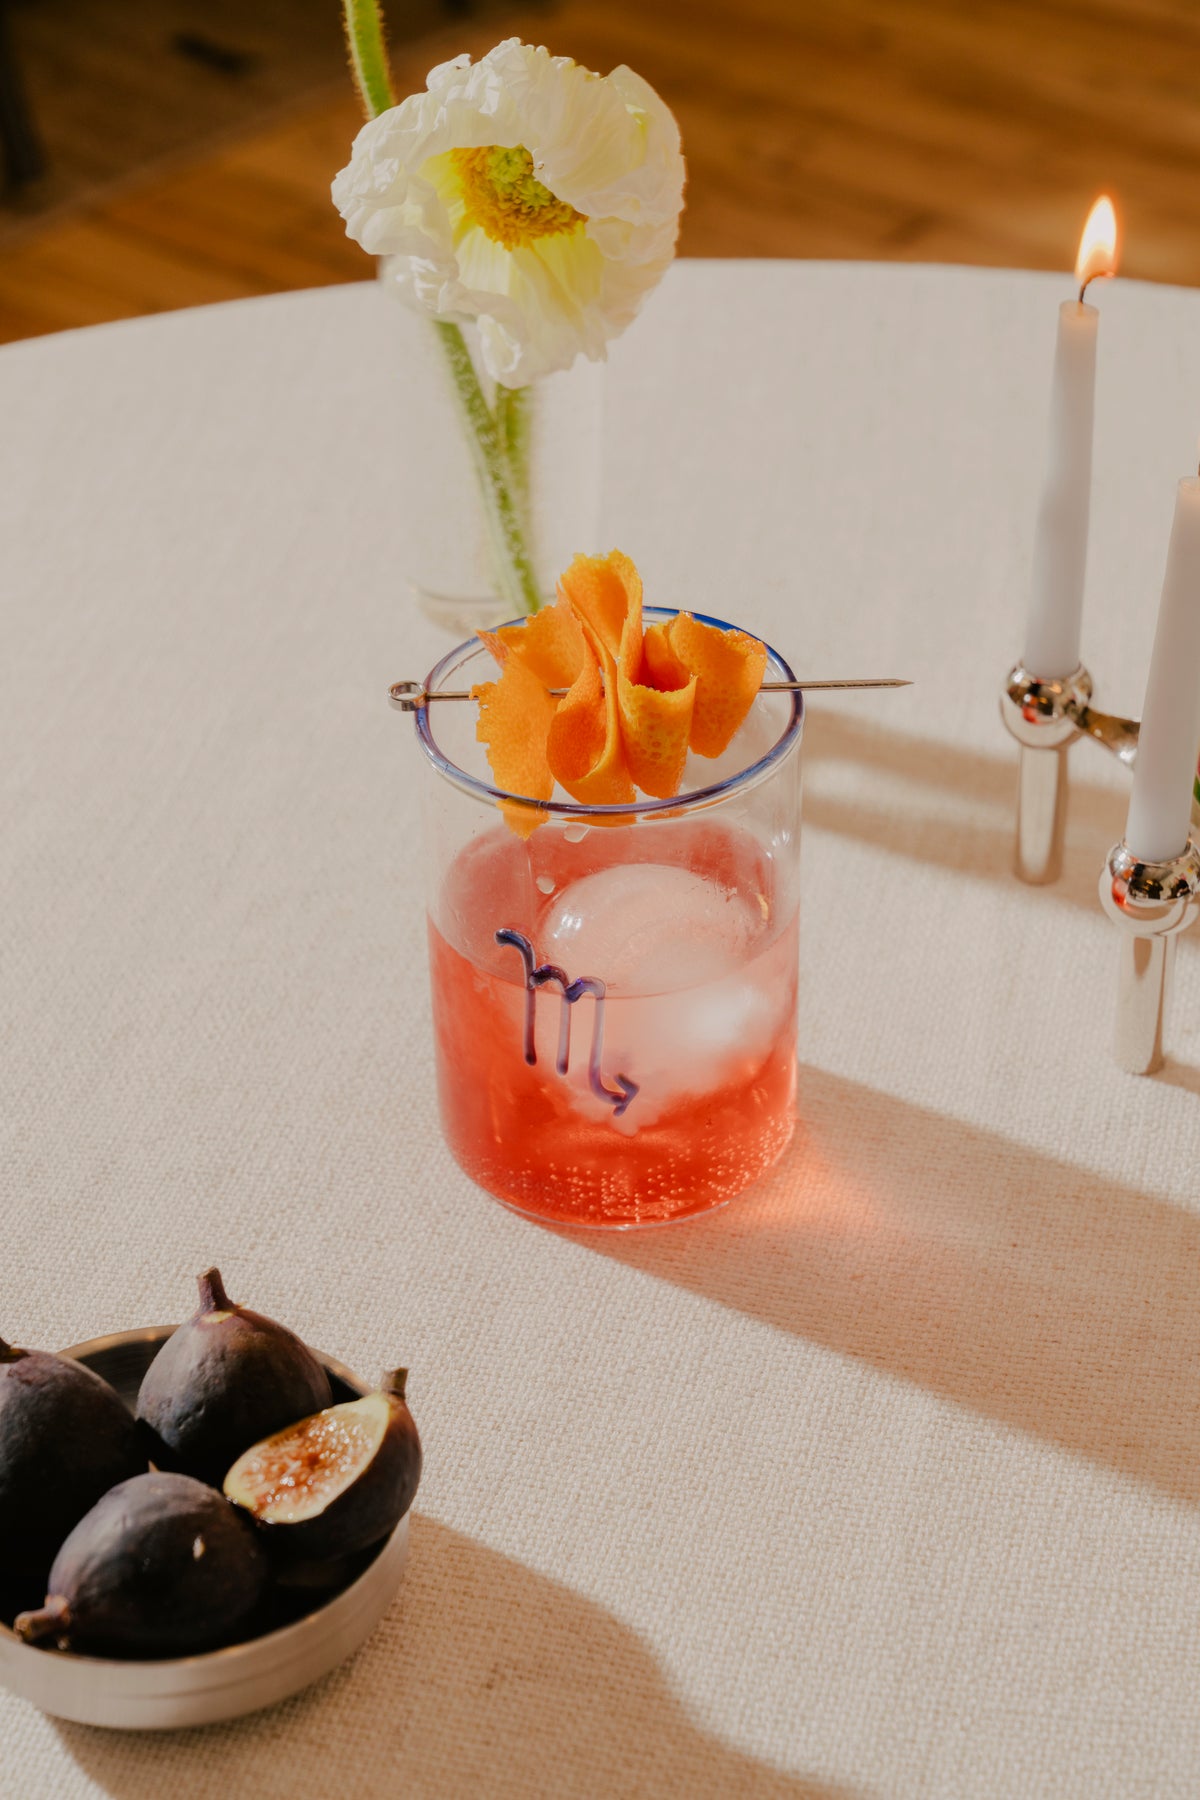 A Negroni cocktail in a clear glass with a blue rim and the astrological symbol for Scorpio in cobalt blue glass. TIn the background, a white poppy in a slender vase and a lit candle on a holder add to the serene and intimate ambiance. To the side, a bowl of ripe figs, some cut open to reveal their red interior, suggests a sophisticated and sexy ambiance for date night.